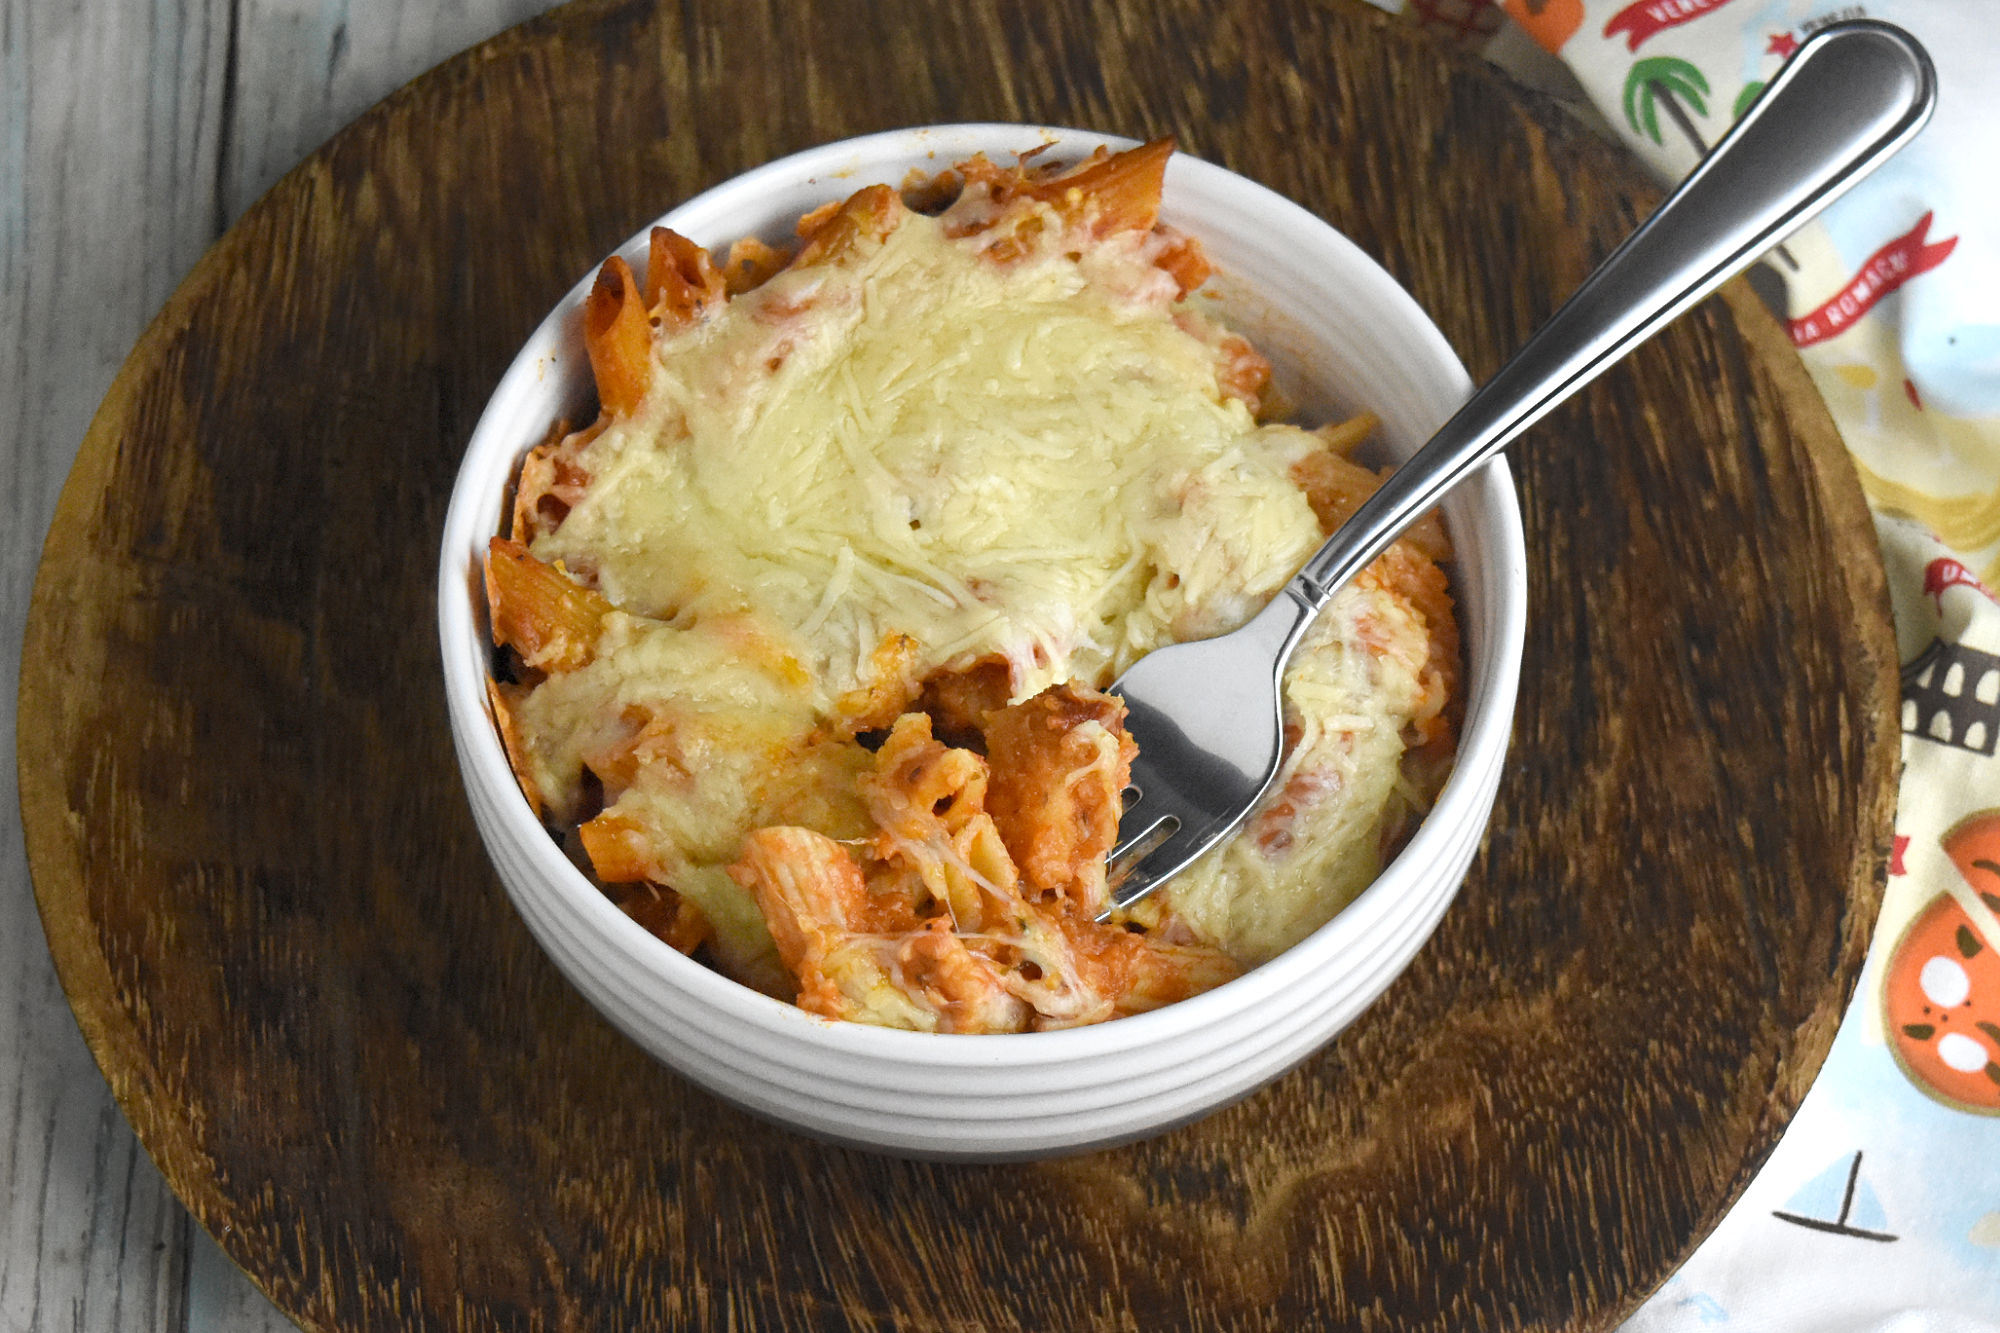 Chicken Parm Pasta Bake is a simple recipe with only five ingredients. But the chicken Parm flavors are all there in this easy and delicious casserole. #OurFamilyTable #chickenParm #casserole #pastadish #bakedpasta